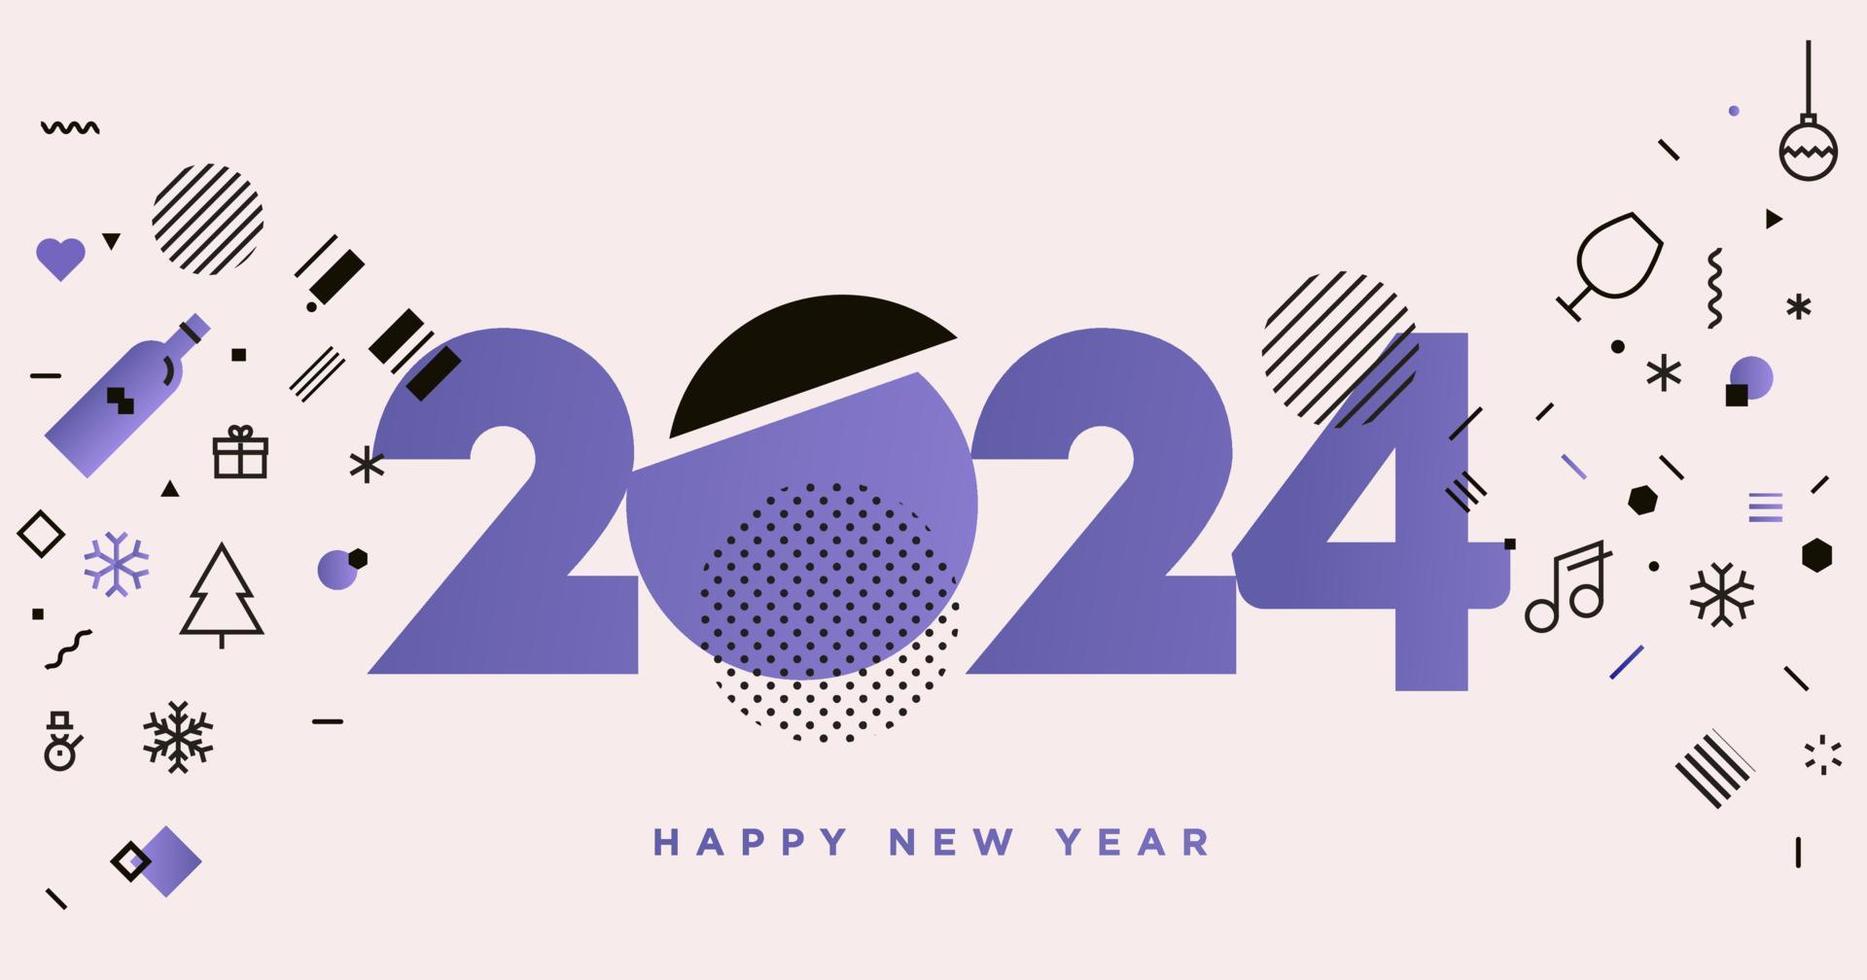 Happy New Year 2024 Greeting Card vector